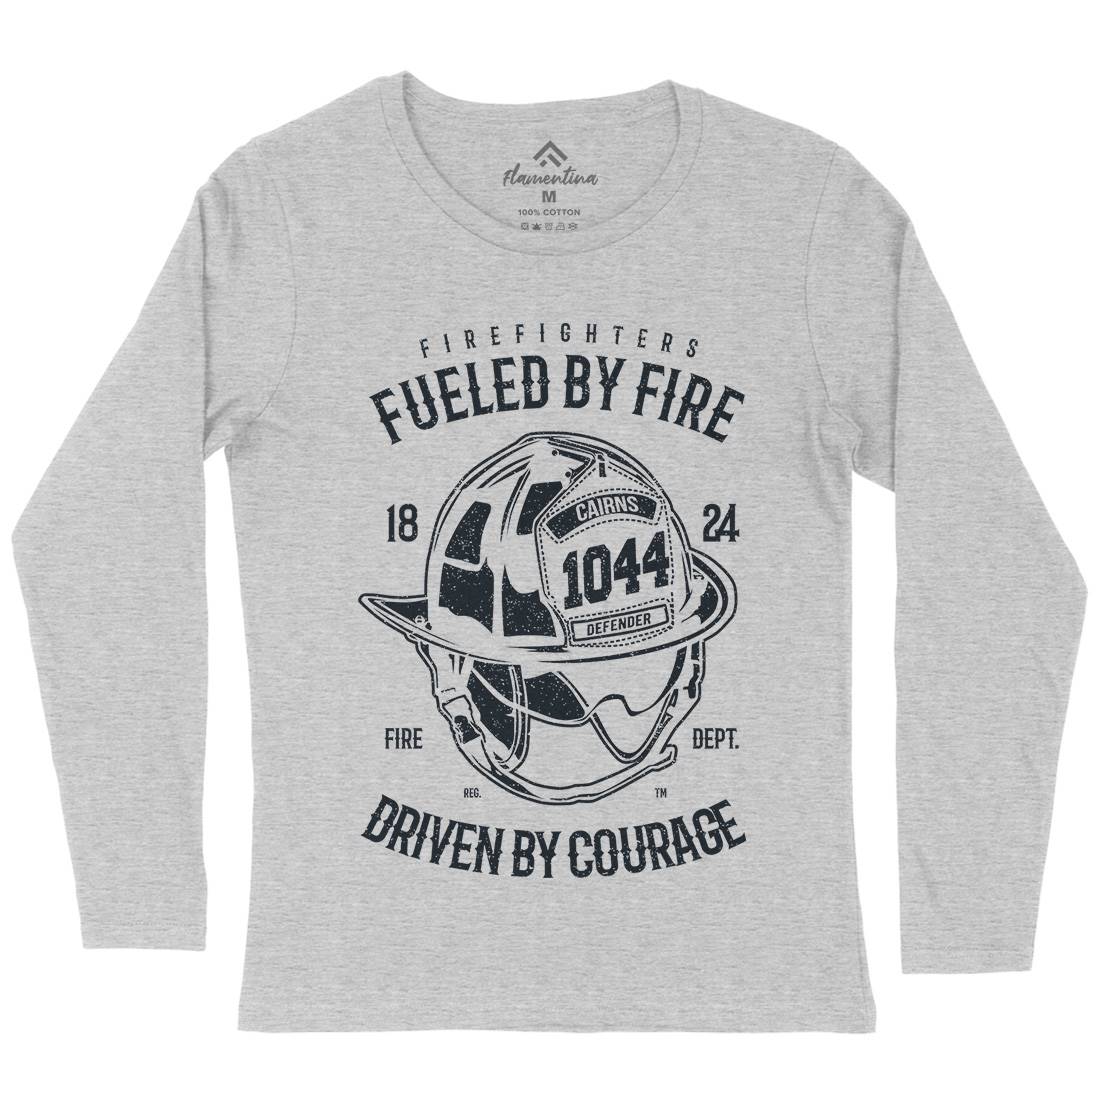 Fuelled By Fire Womens Long Sleeve T-Shirt Firefighters A667